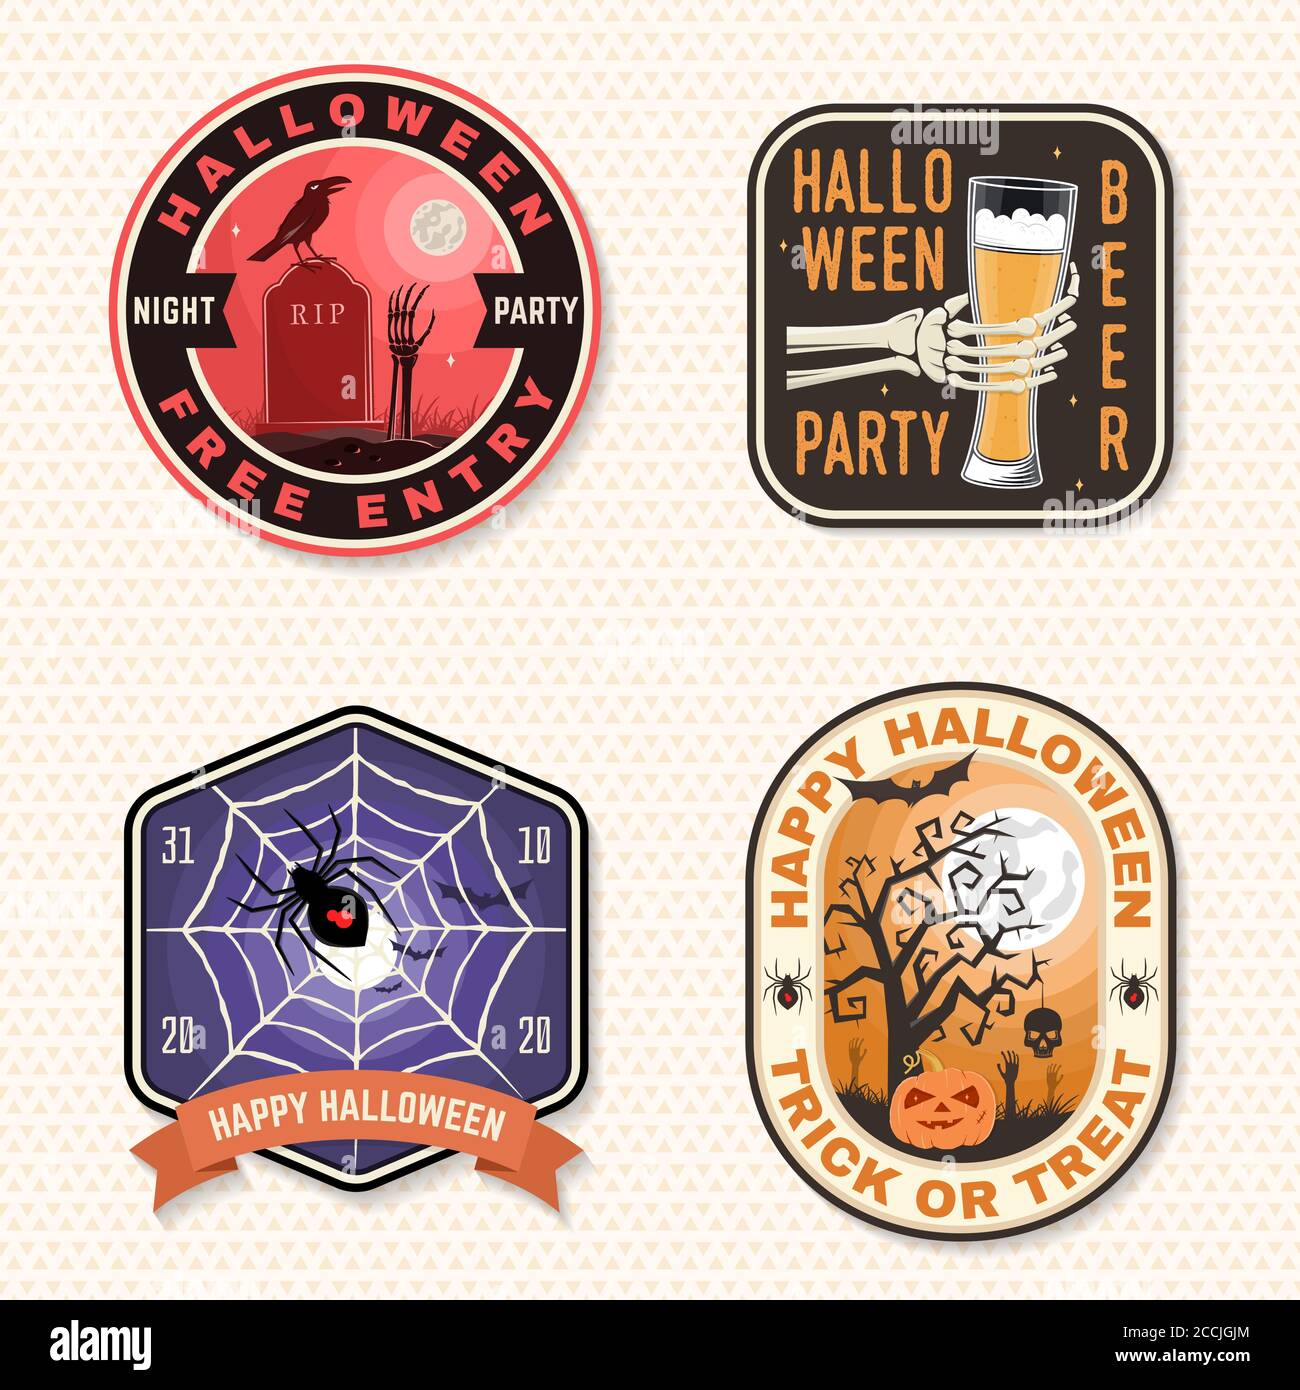 Download Halloween Beer Party Patch Halloween Retro Badge Pin Sticker For Logo Print Seal Stamp Scarecrow With Raven Pumpkin Skeleton Hand With Glass Of Magic Beer Typography Design Stock Vector Stock Vector Image